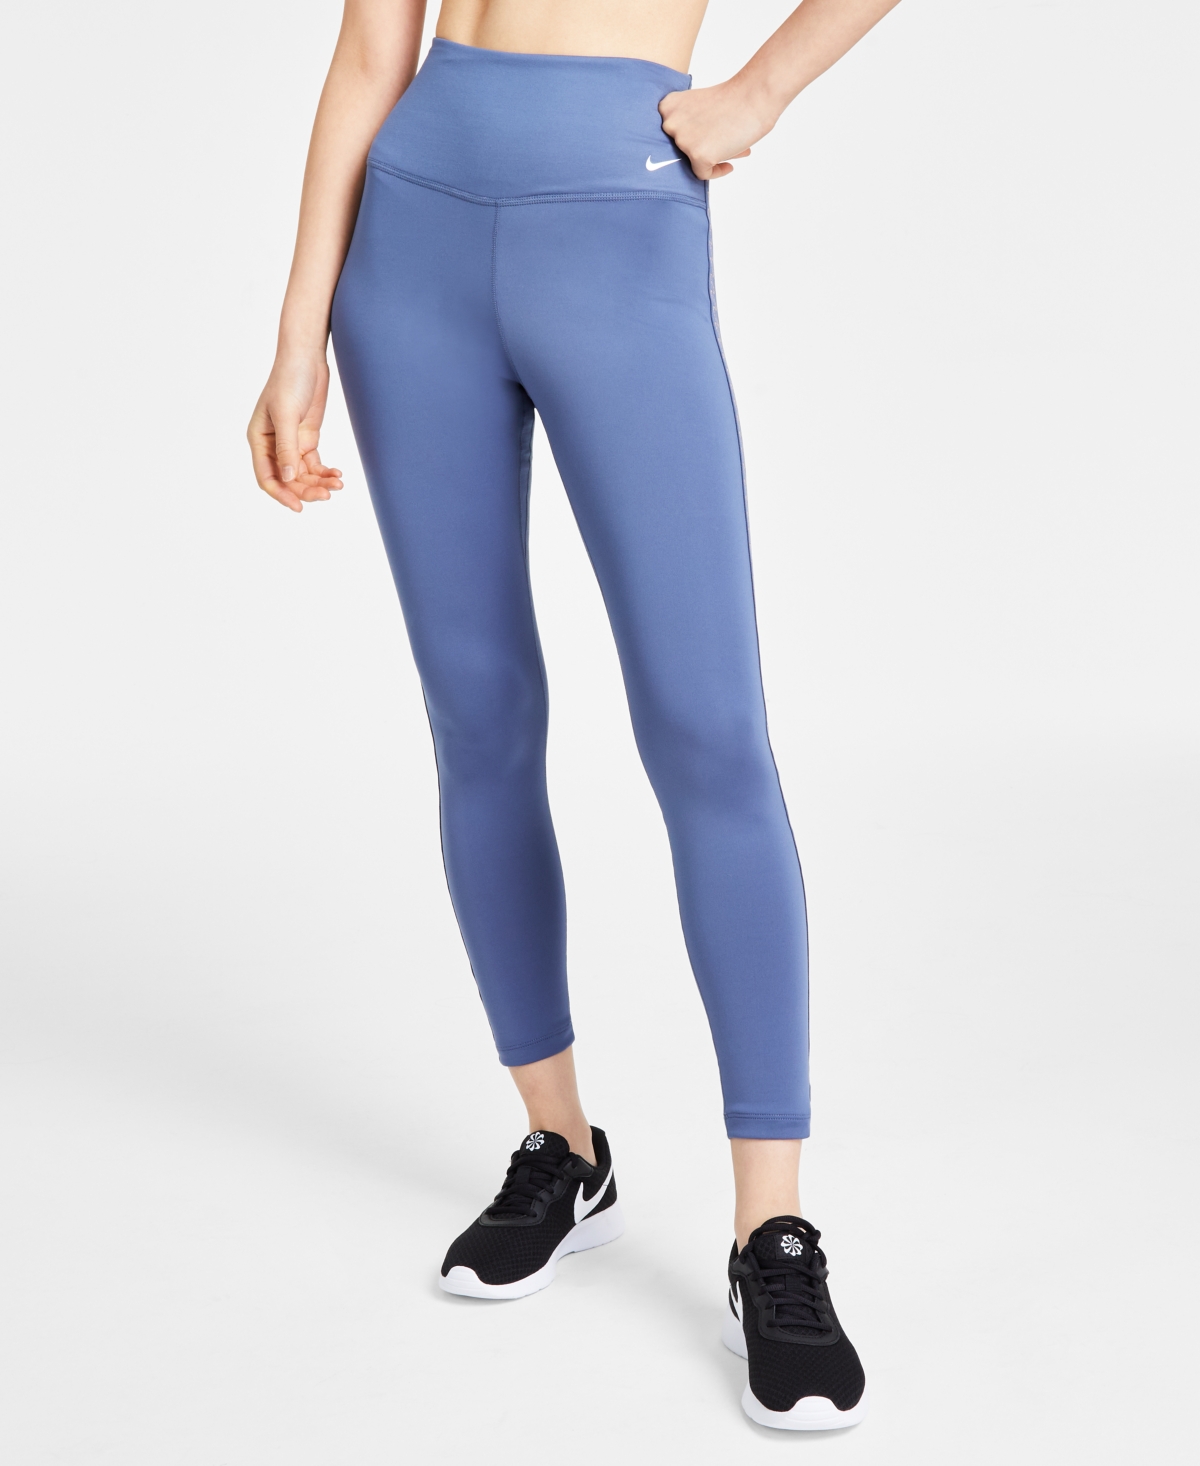 Nike Women's Therma-fit One High-waisted 7/8 Leggings In Diffused Blue,white